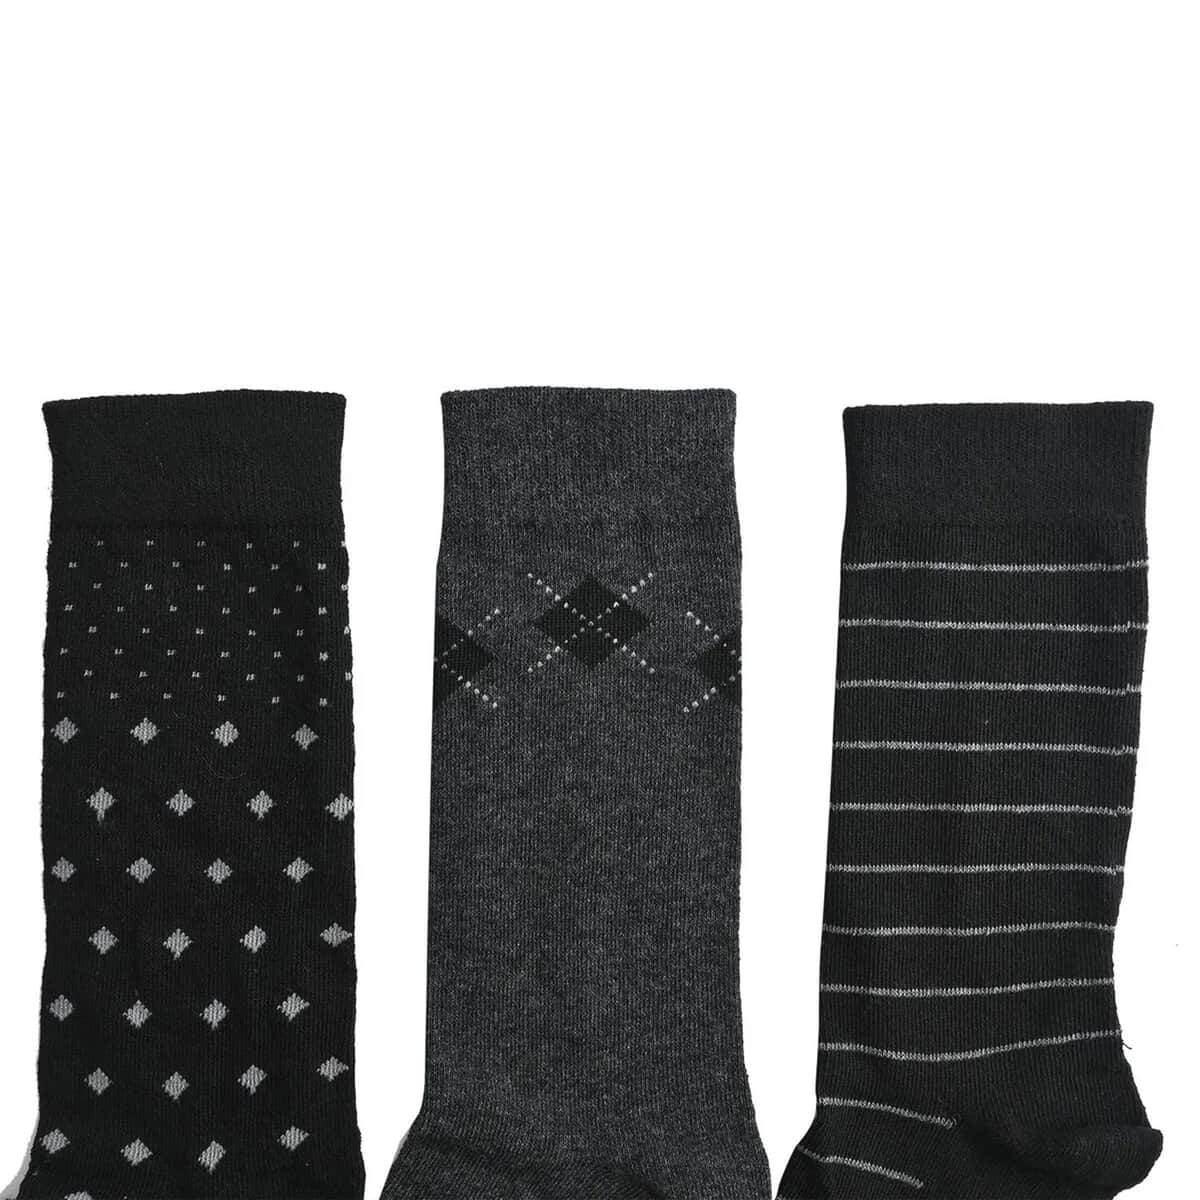 Marco Cavelli Black and Gray Set of 3 Men's Dress Socks, Breathable and Soft Socks for Men, Polyester and Cotton Socks, image number 5